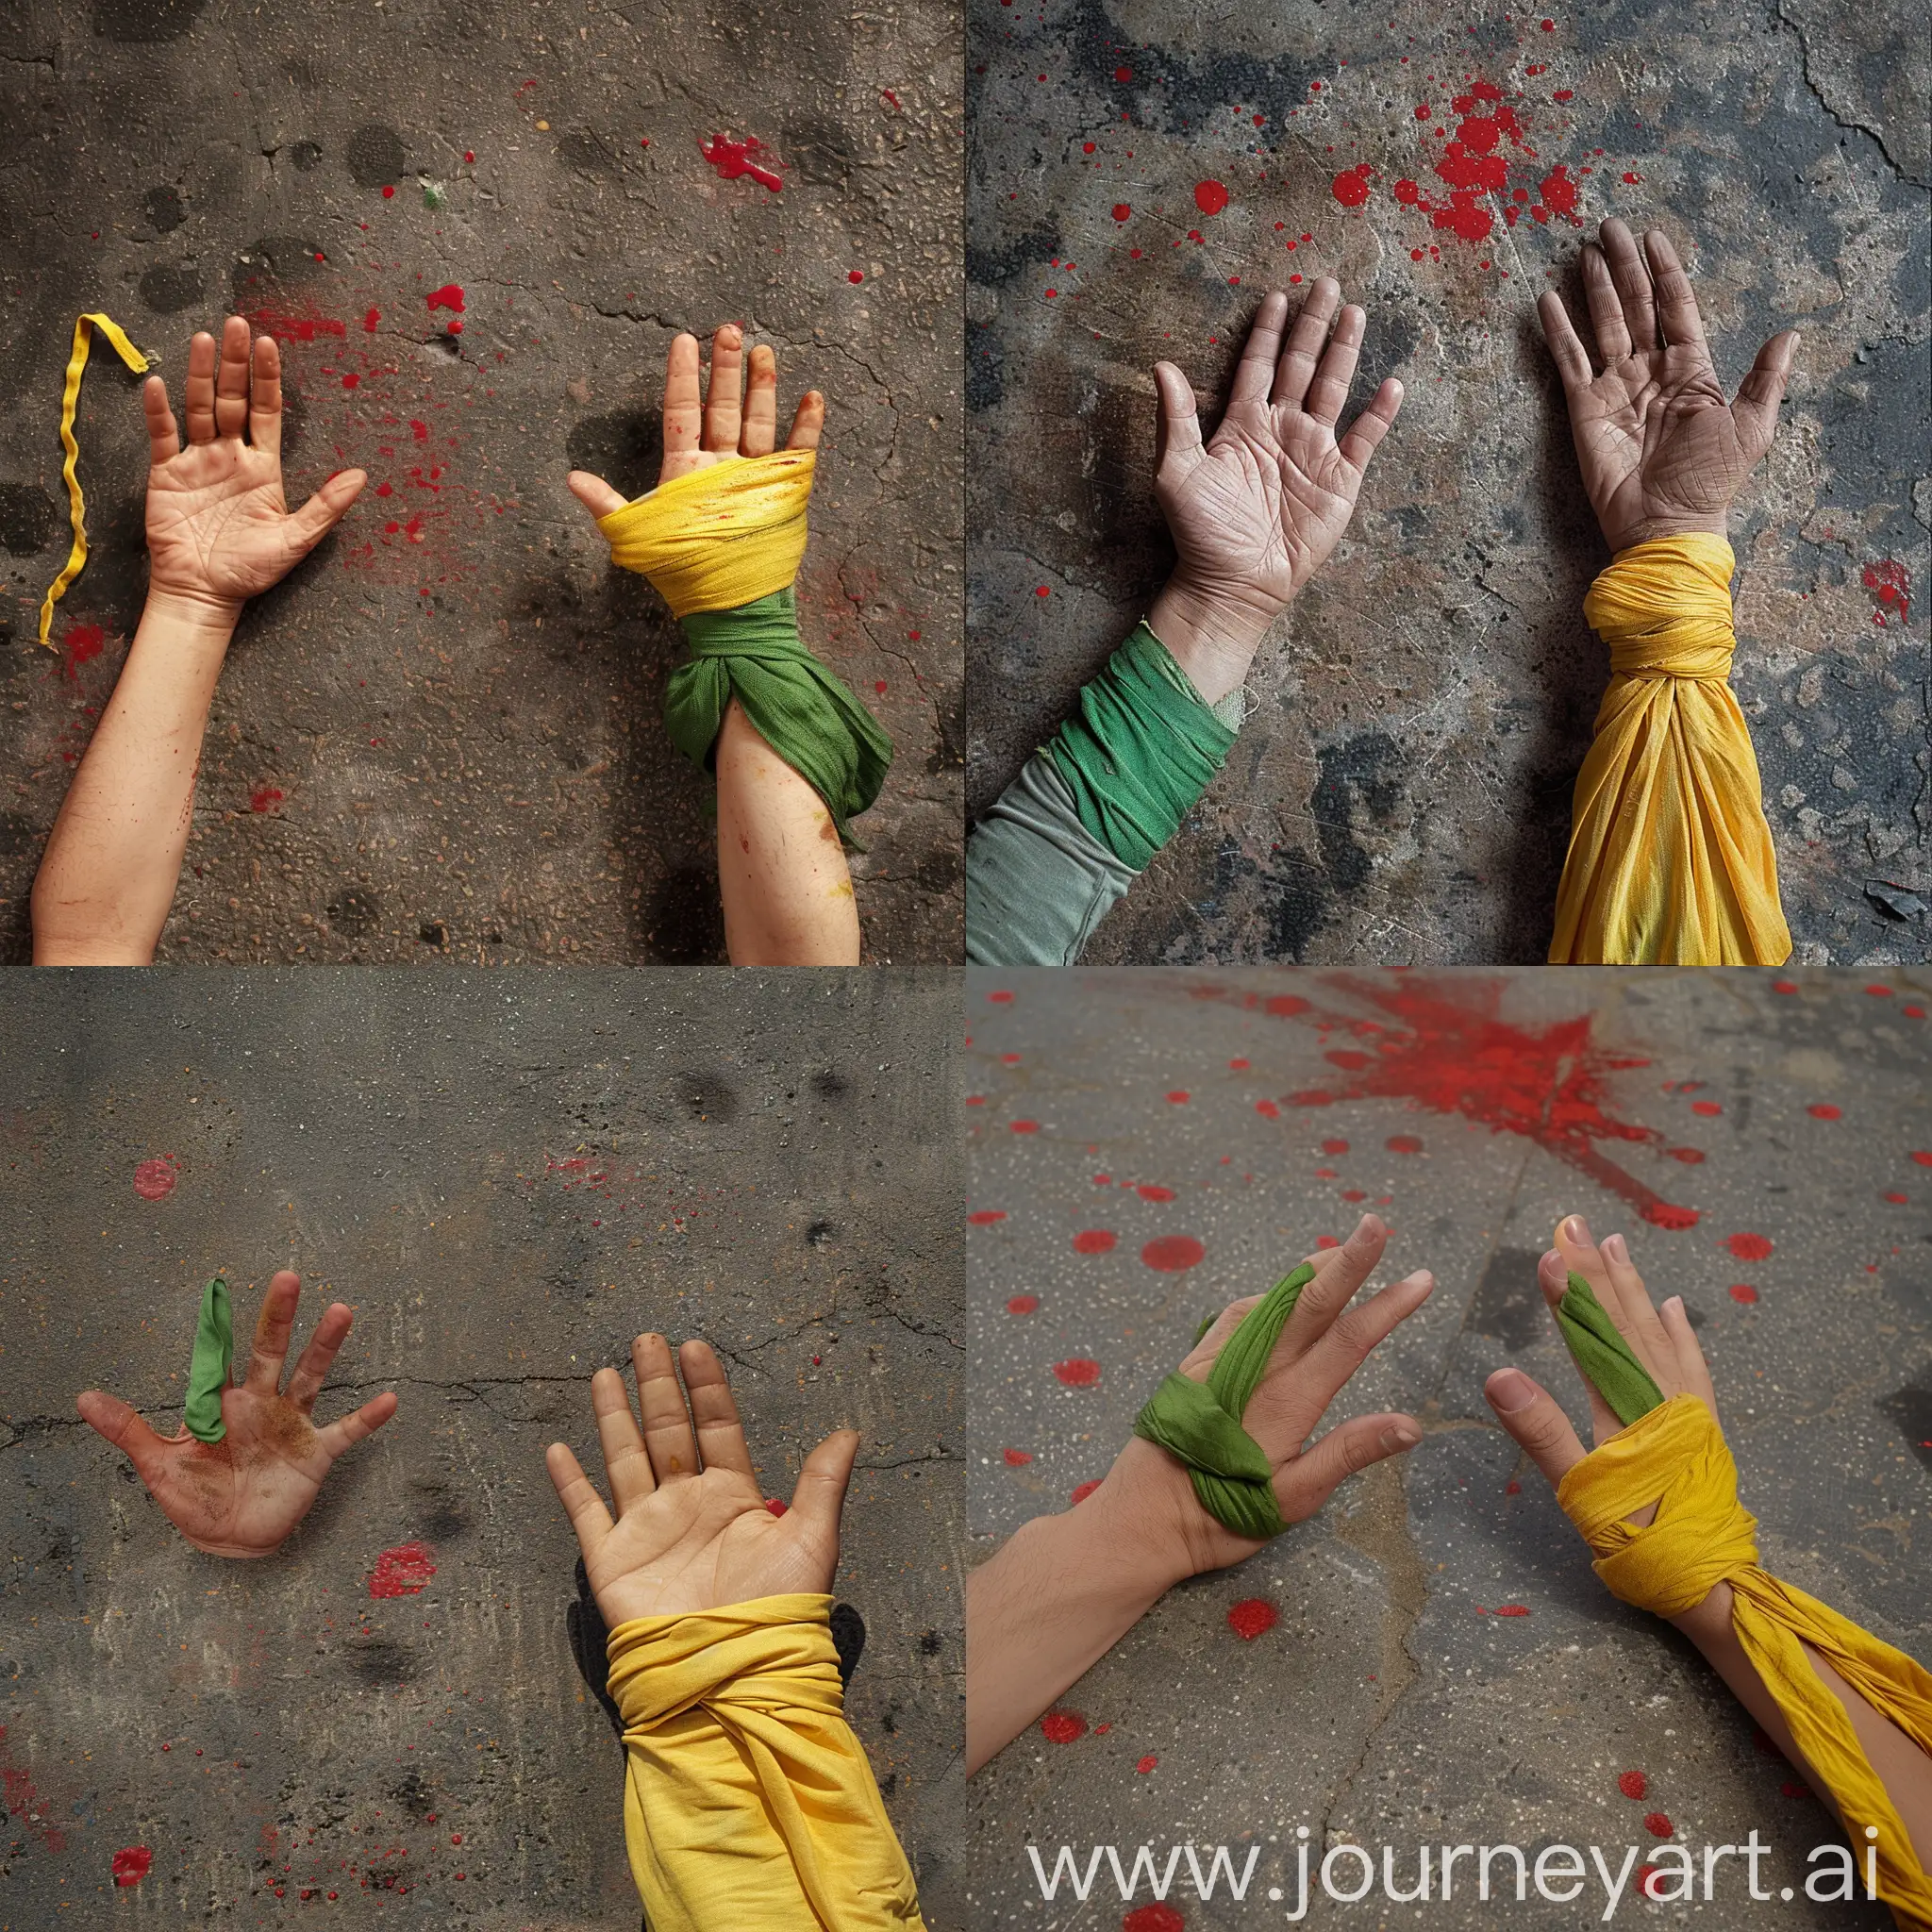 On an asphalt floor, there is an open right hand with a yellow cloth band tied around its knuckles, and opposite it is an open hand with a green cloth band tied around its knuckles.  There are red spots on the ground.